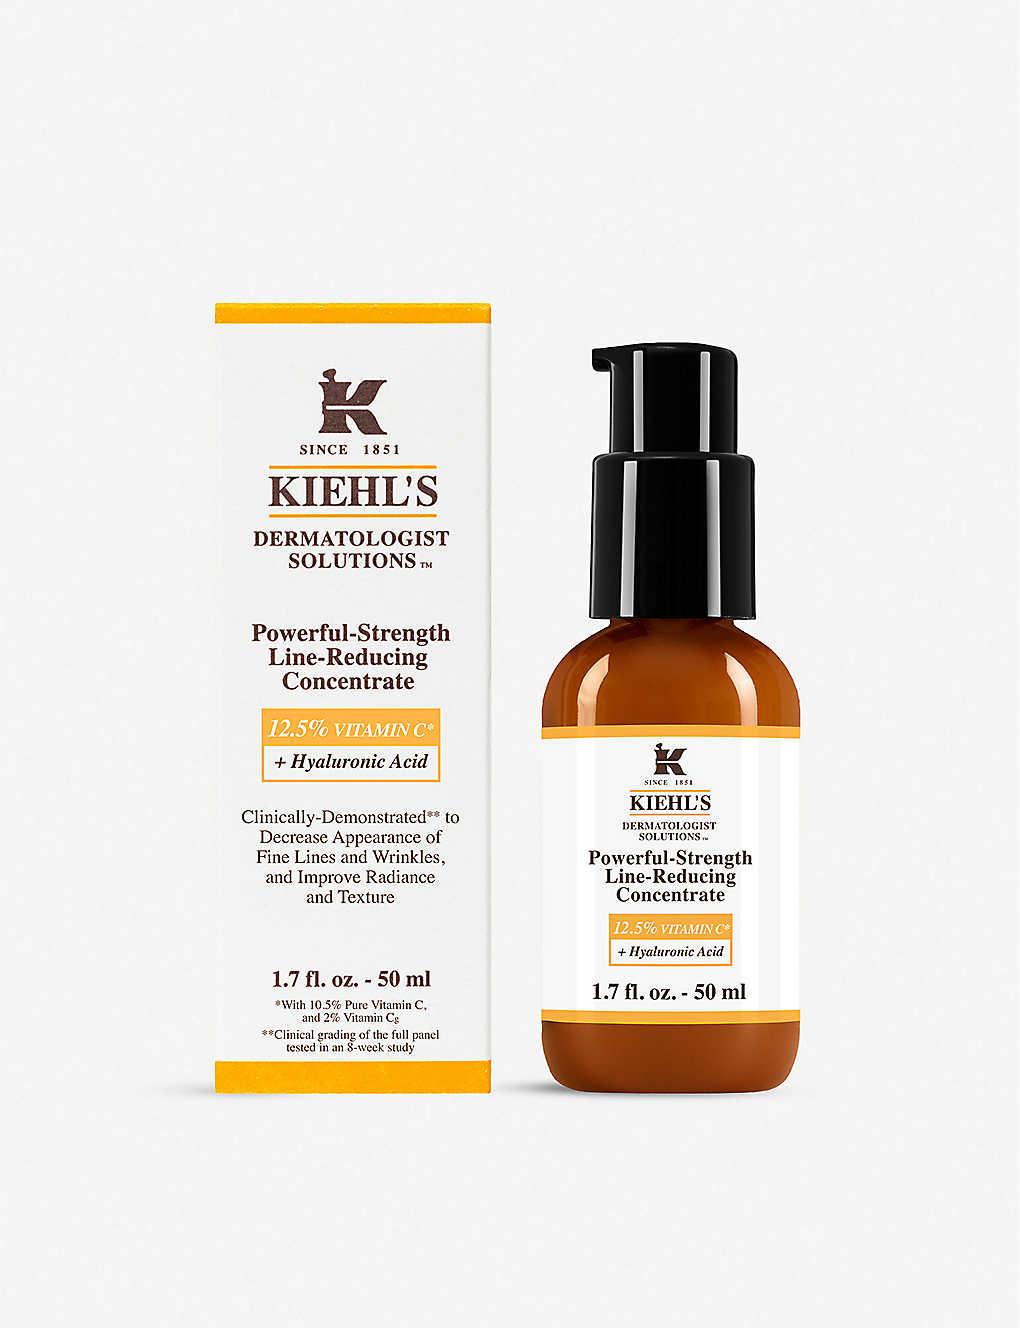 Kiehl's Vitamin C Powerful-Strength Line-Reducing Concentrate (Ảnh: Internet)